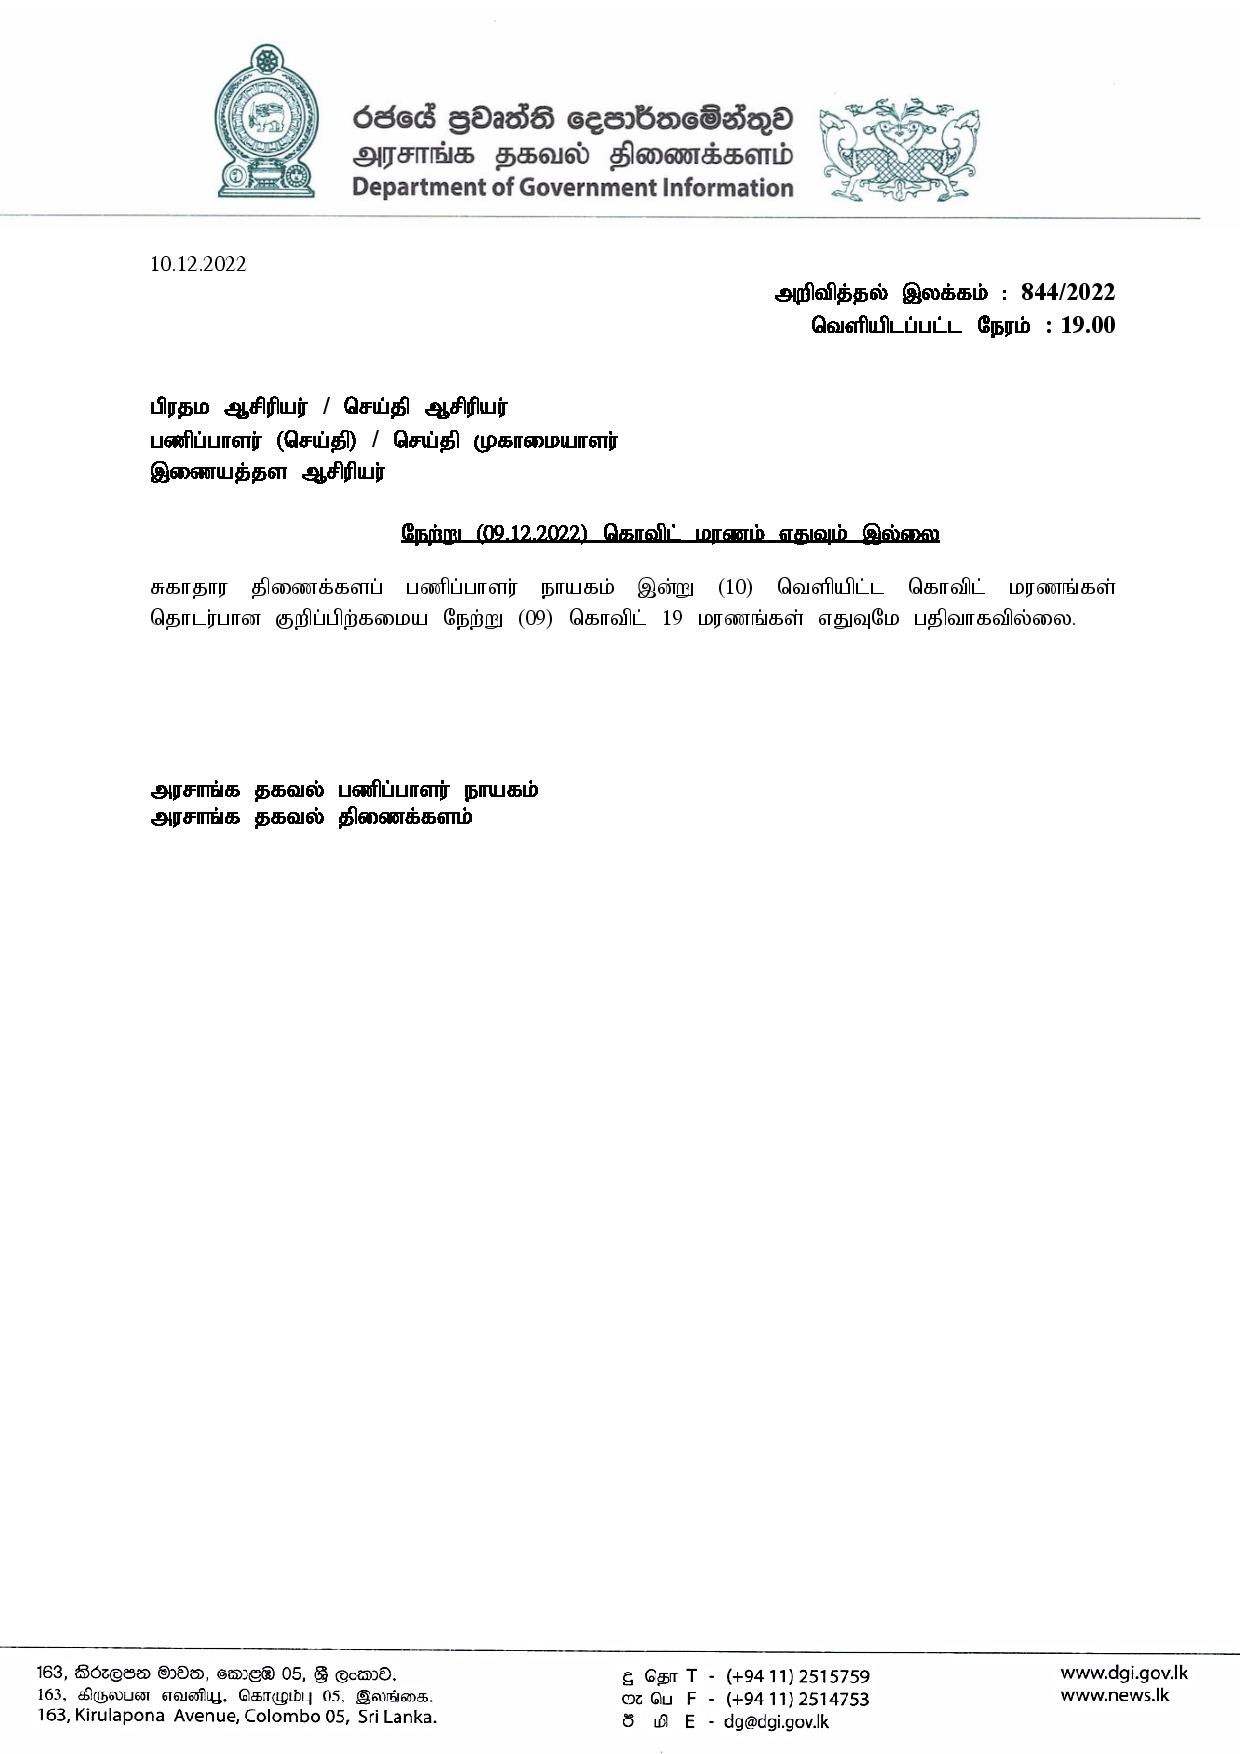 Release No 844Tamil page 001